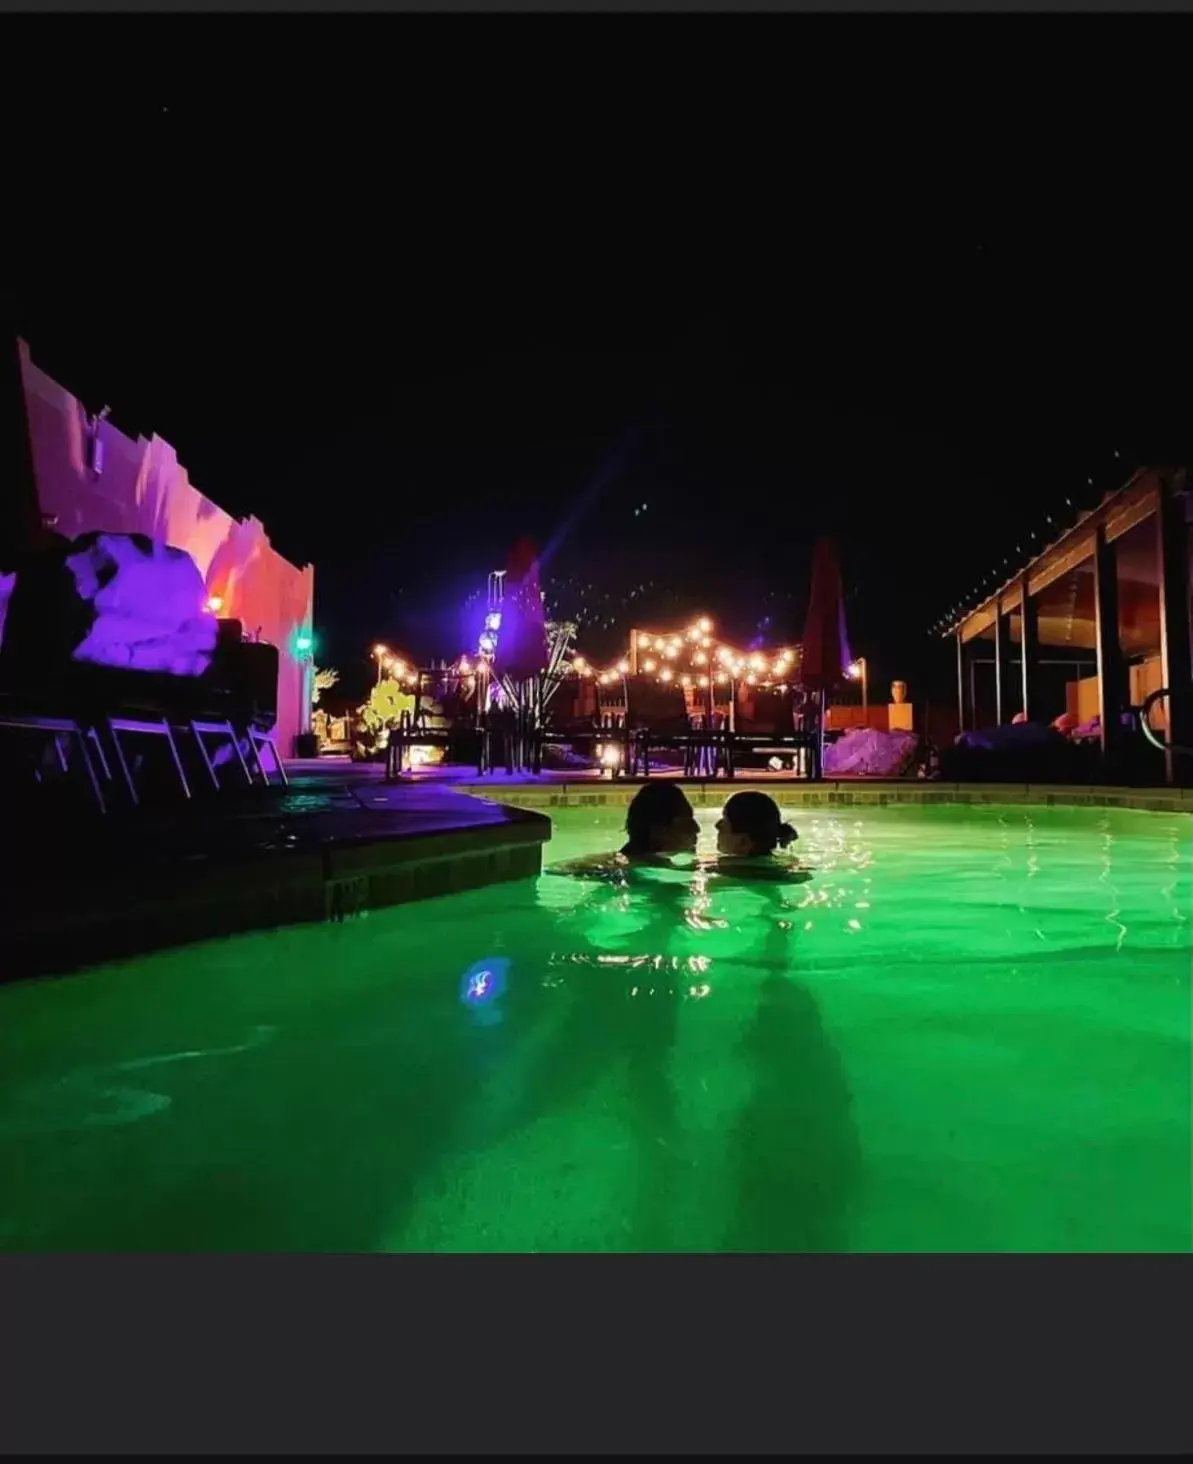 Night, Swimming Pool in MI KASA HOT SPRINGS 420,Adults Only, Clothing Optional